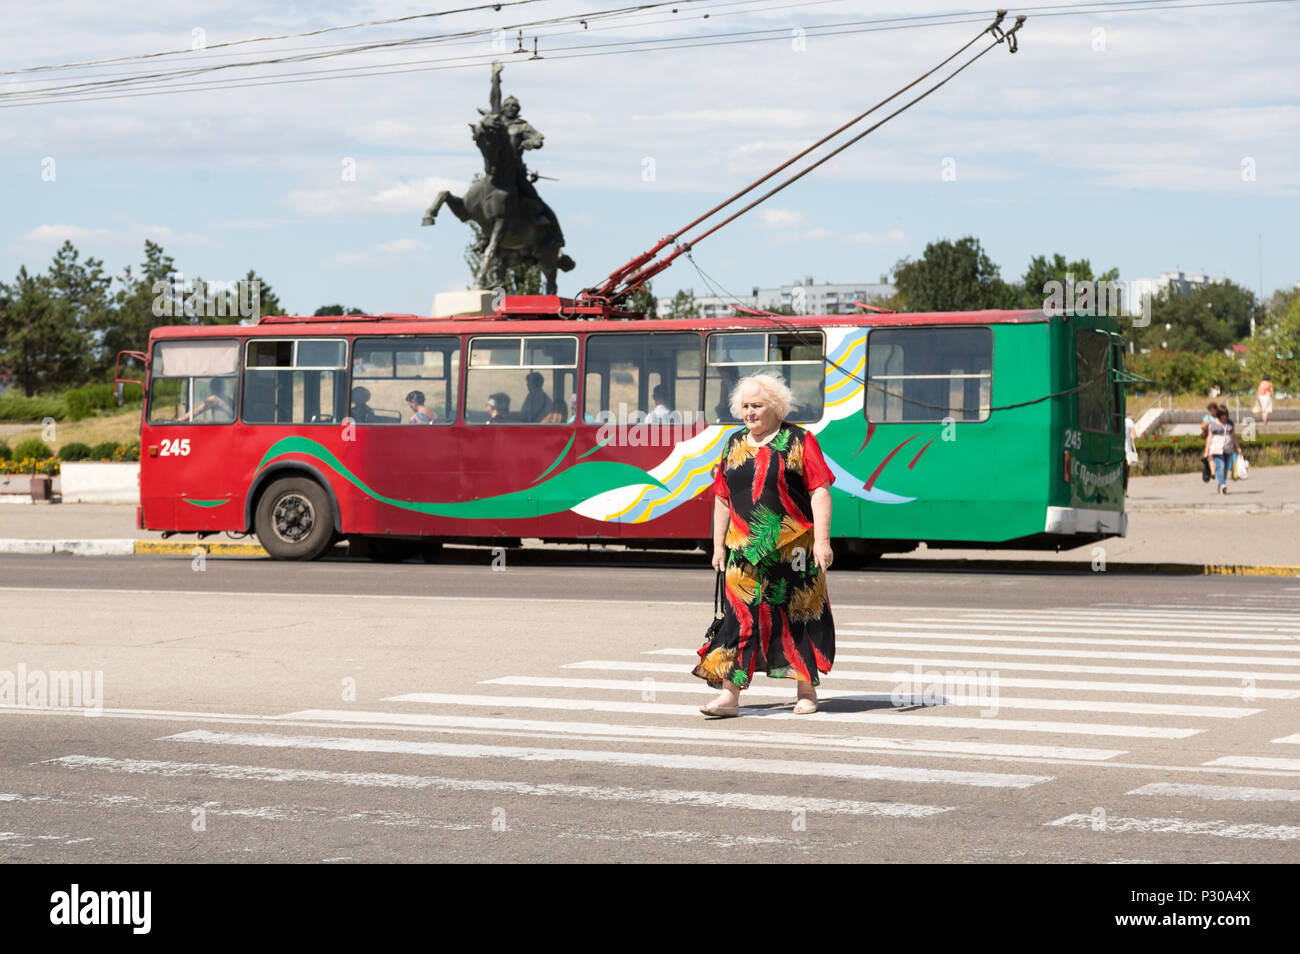 25.08.2016, Tiraspol, Transnistria, Moldova - Trolleybus in transnistrian colors, older lady in color matching dress crosses zebras on the central mai Stock Photo